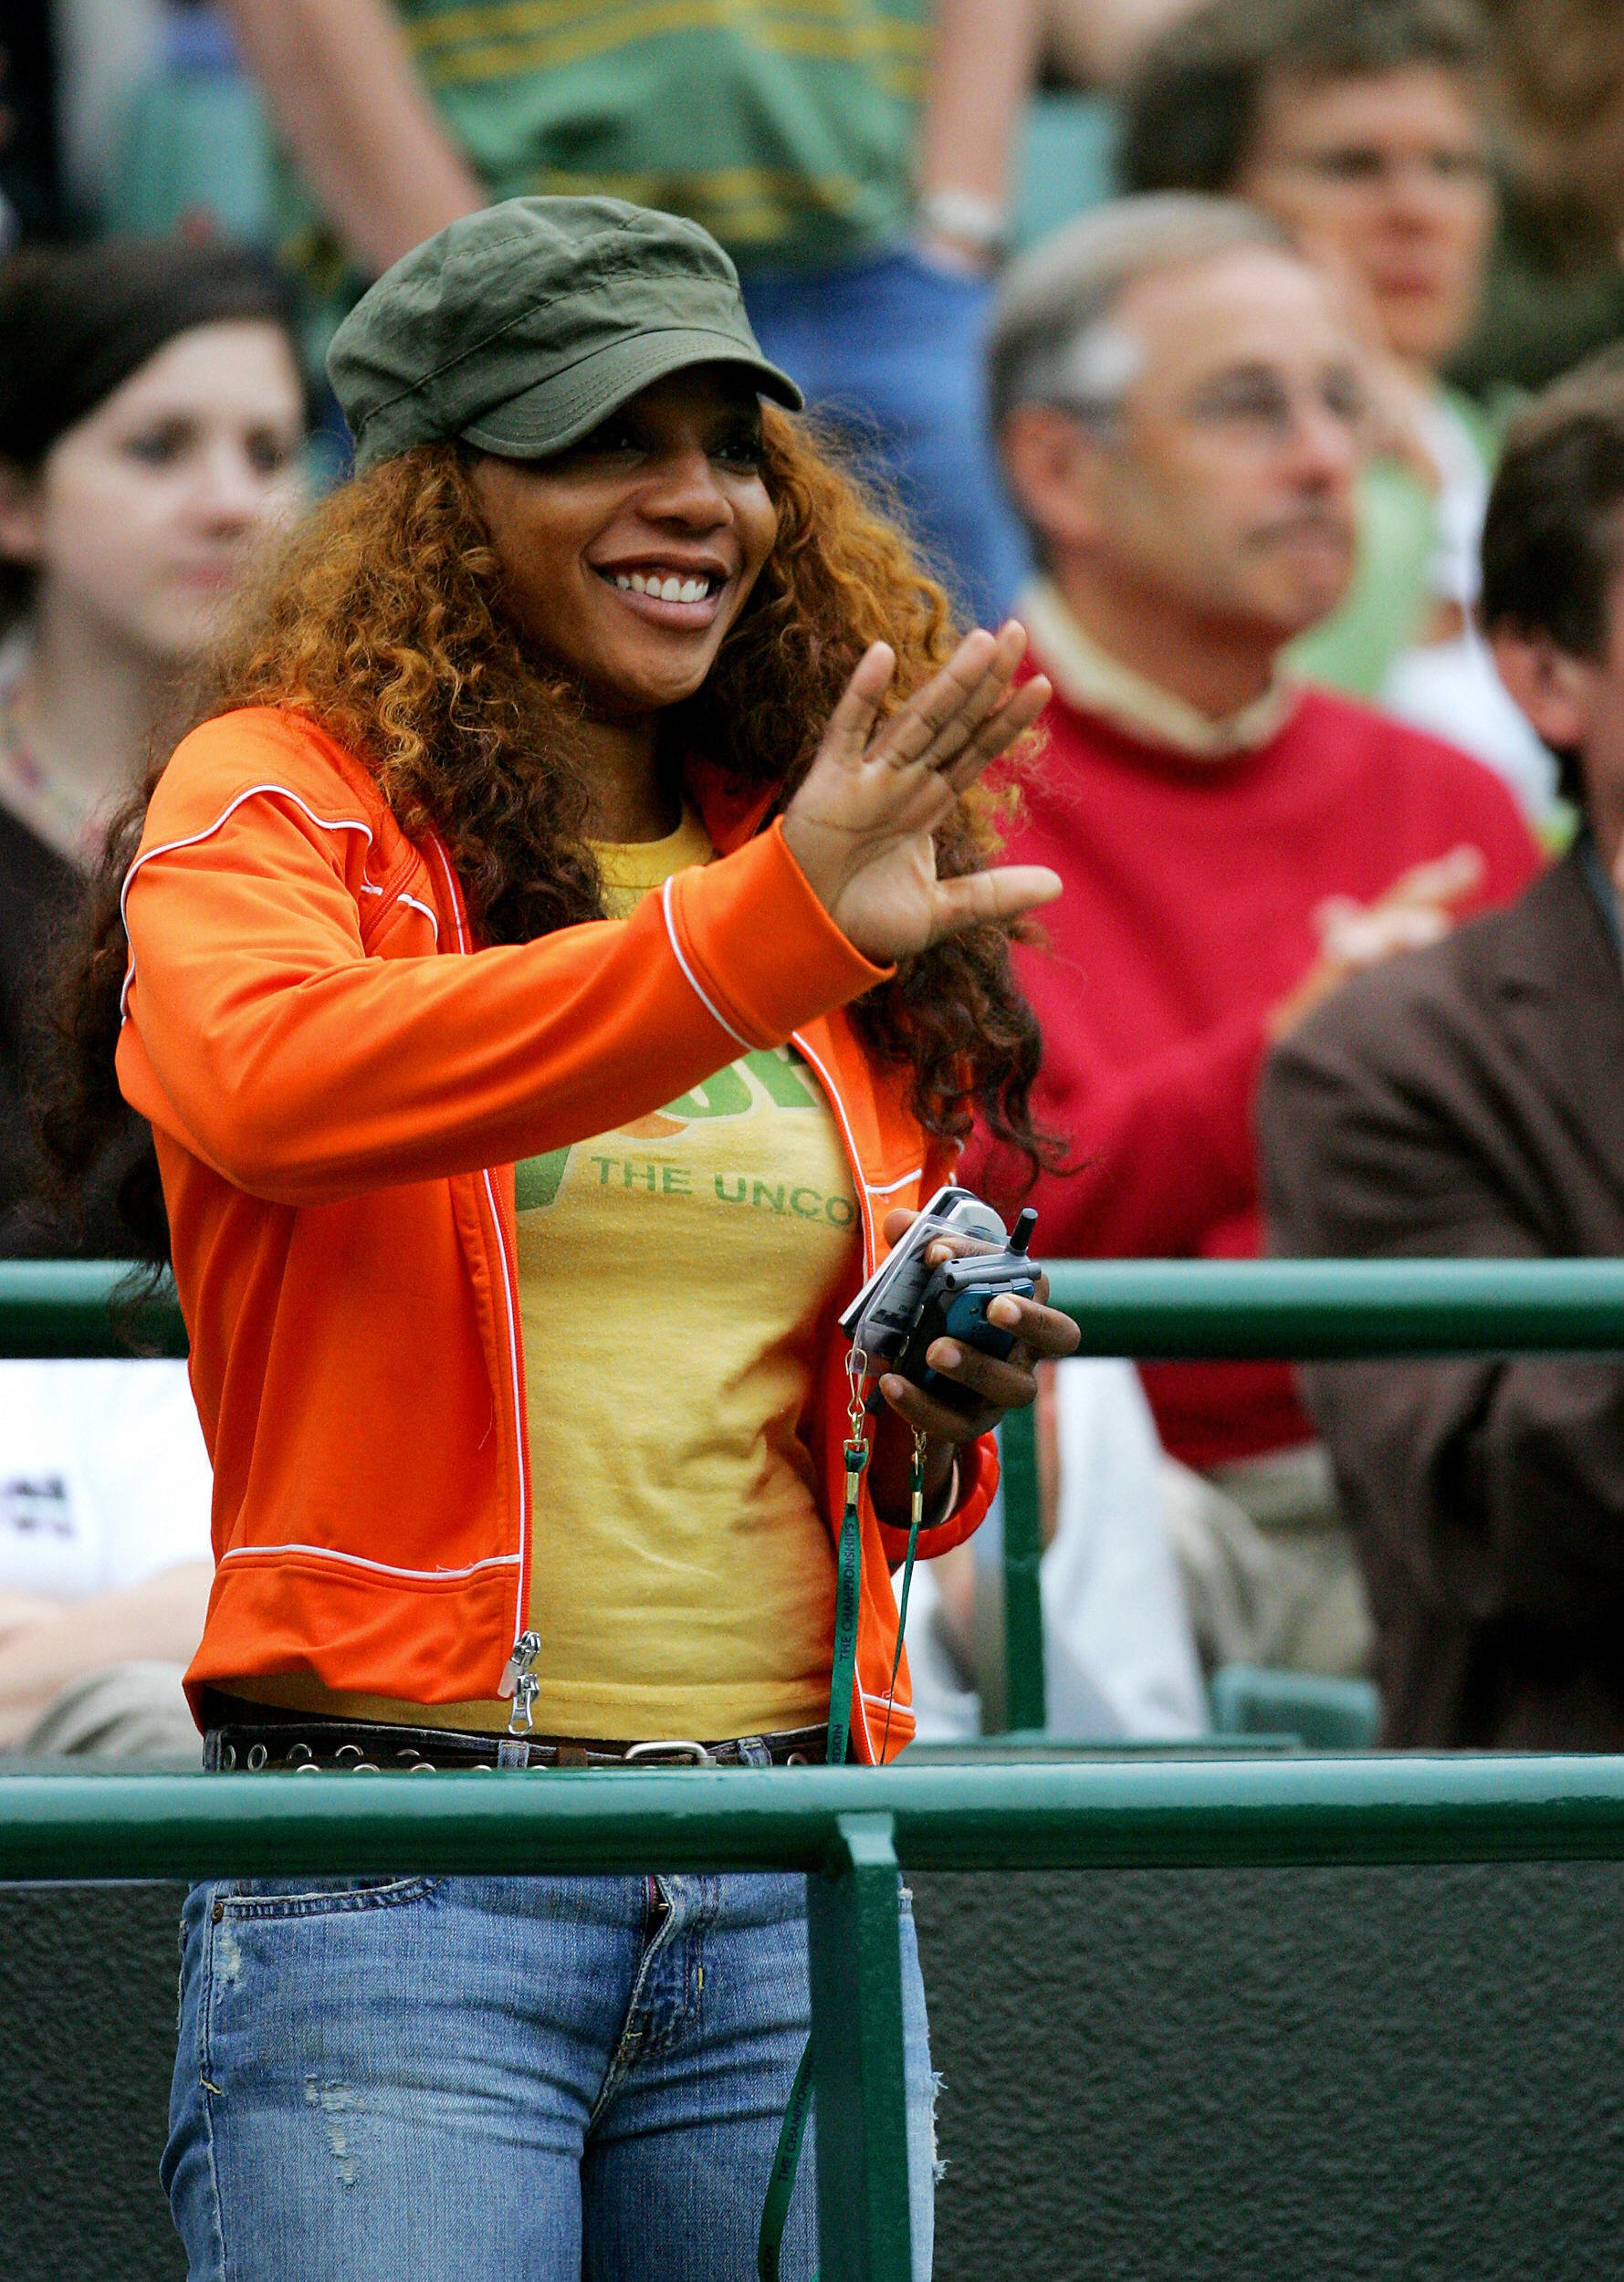 Singer Lyndrea Price waves to her half-sister American tennis star Venus Williams after she defeated Daniela Hantuchova of Slovakia during their match at the 119th Wimbledon Tennis Championships in London, 25 June, 2005. | Source: Getty Images